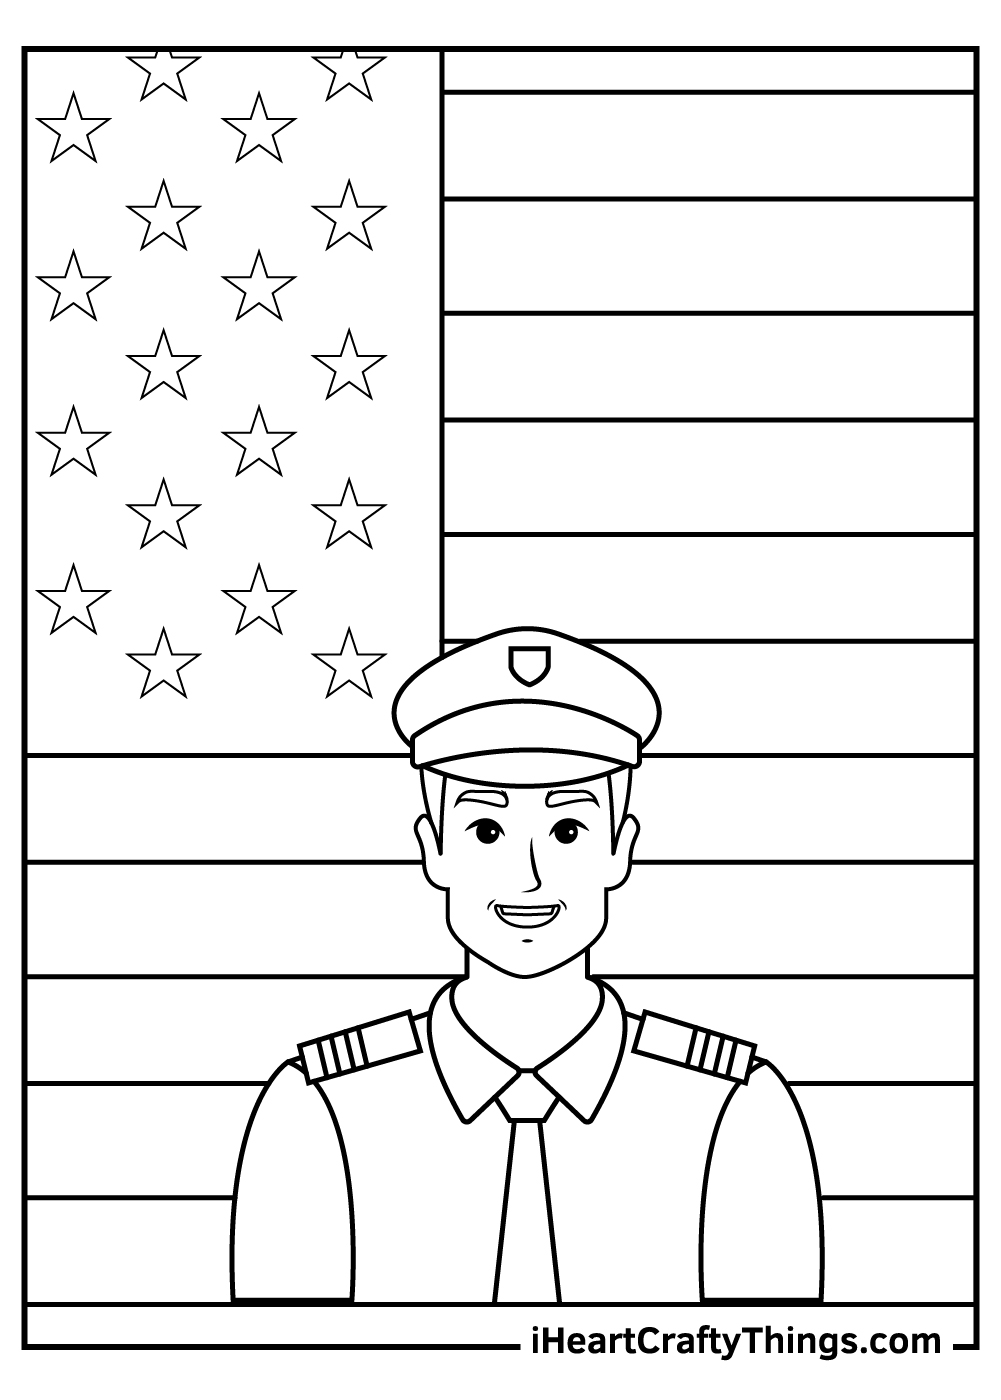 Veteran’s Day Coloring Pages free printable